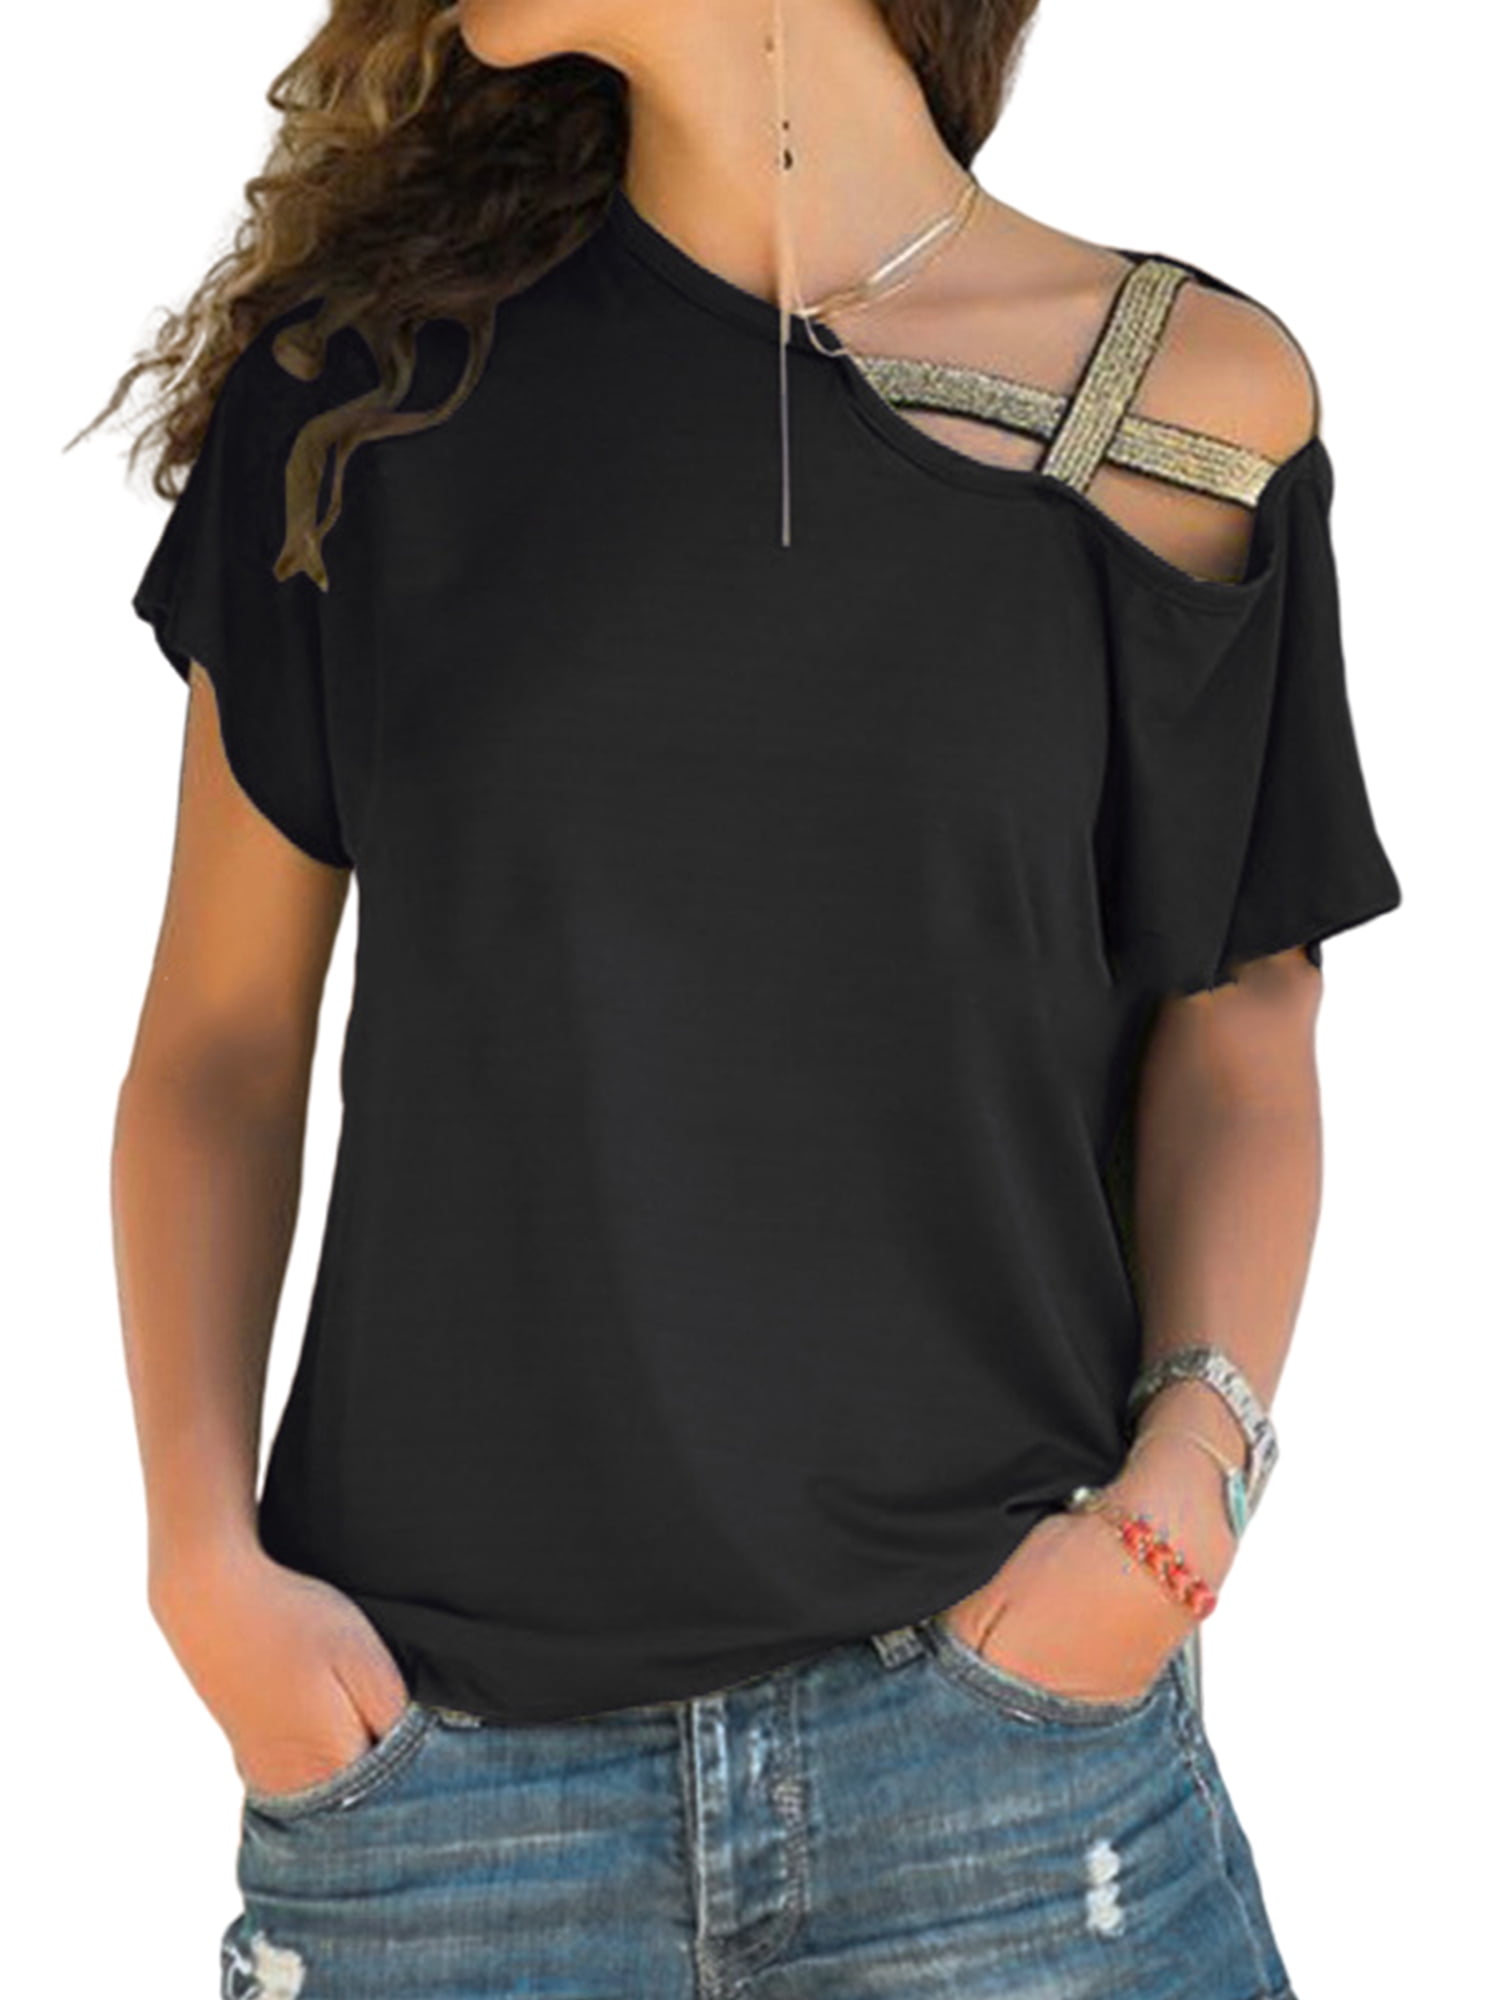 Dressin Women Summer T Shirt Ladies Short Sleeve Strappy Cold Shoulder T-Shirt Tops Womens Loose Tops Basic Blouse